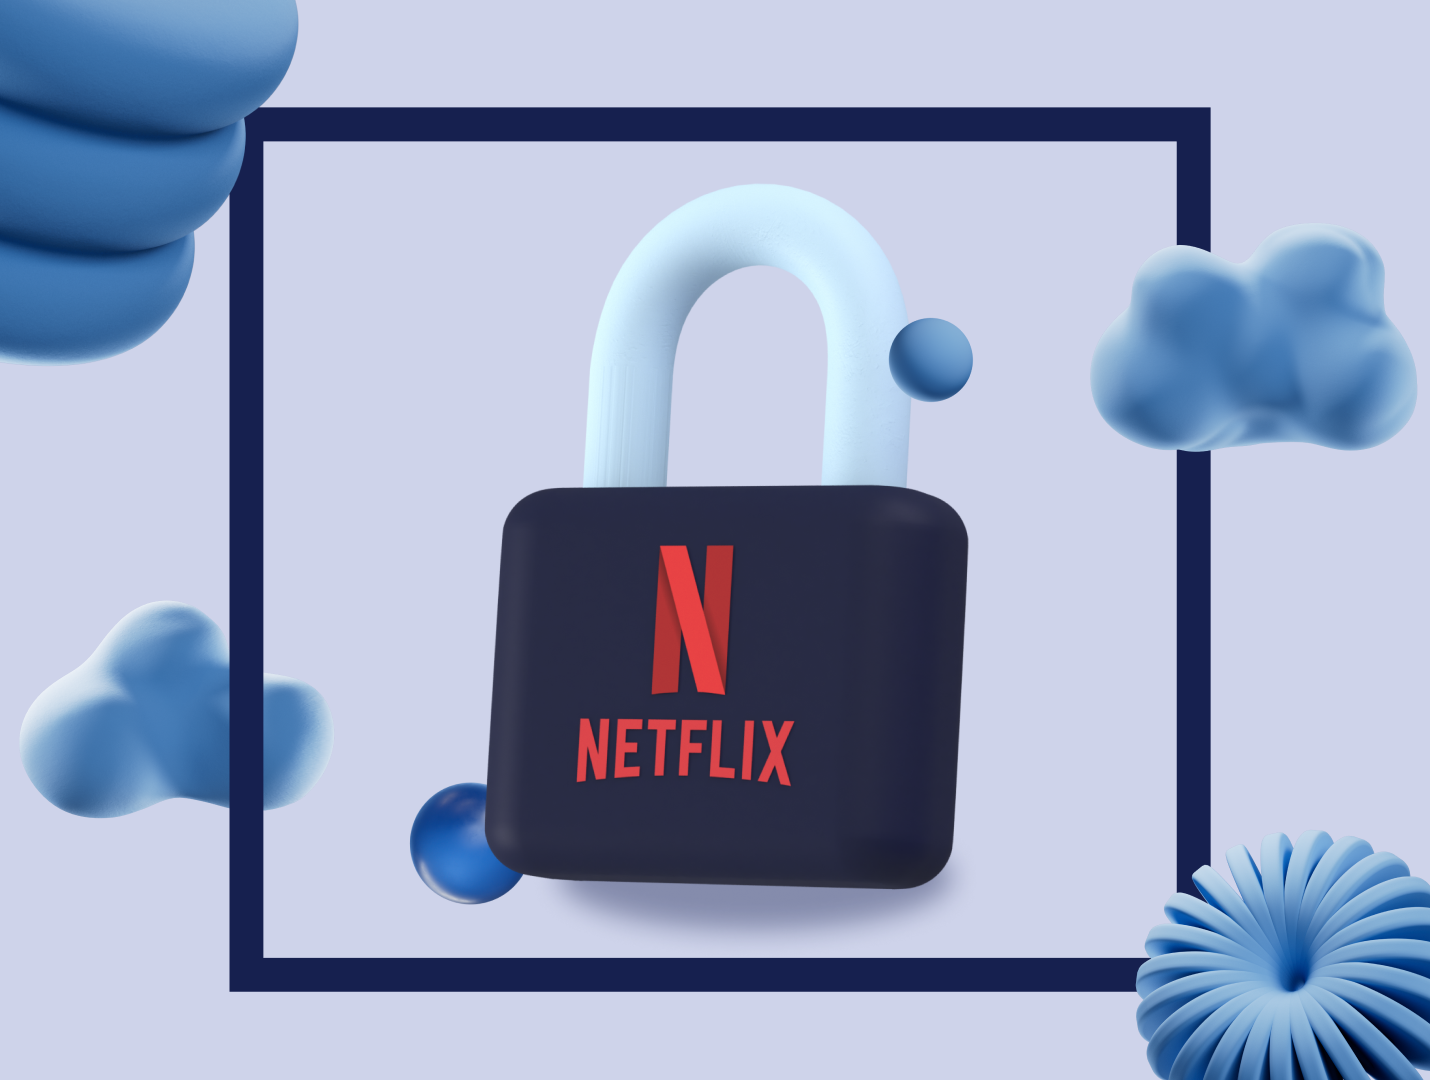 How Netflix’s password crackdown could be creating cracks in their armor